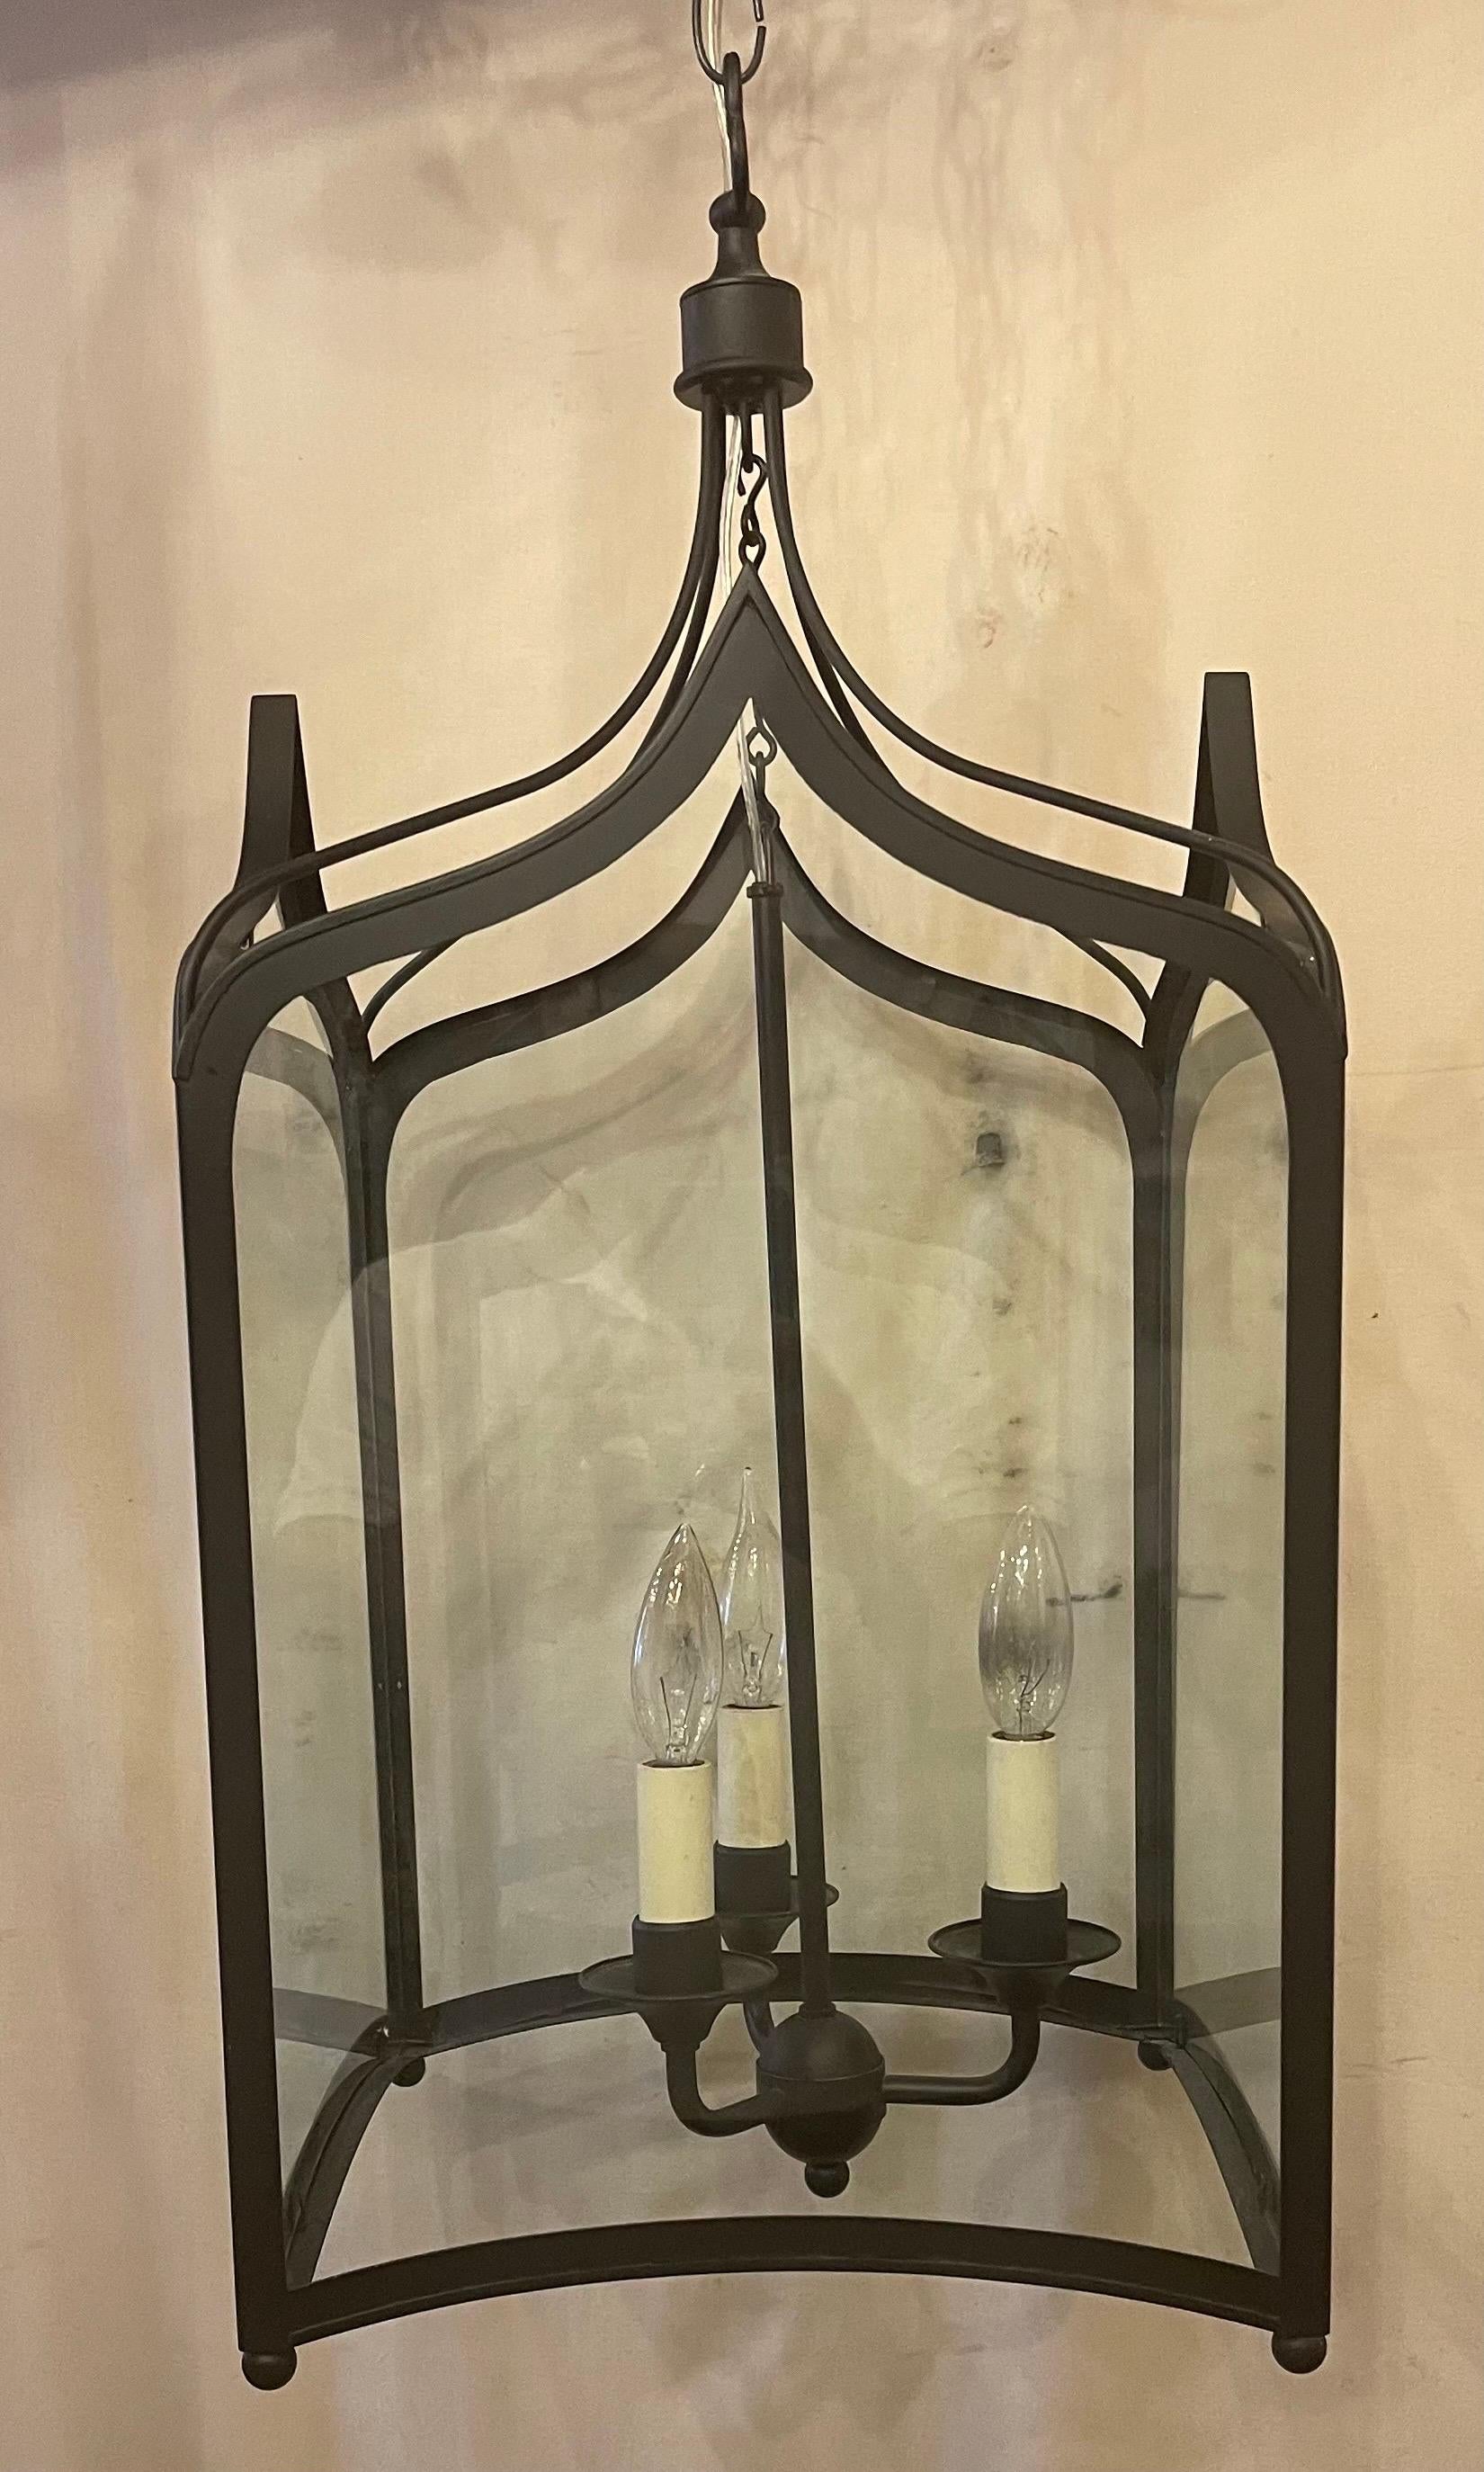 A Wonderful Set Of 3 Vaughan Lighting Regency Square With Arched Top And Bottom Structure In A Matte Black Iron Each Lantern With 3 Candelabra Lights Inside, They are Accompanied By Chain Canopy And Mounting Hardware
They Are UL Listed And Ready To